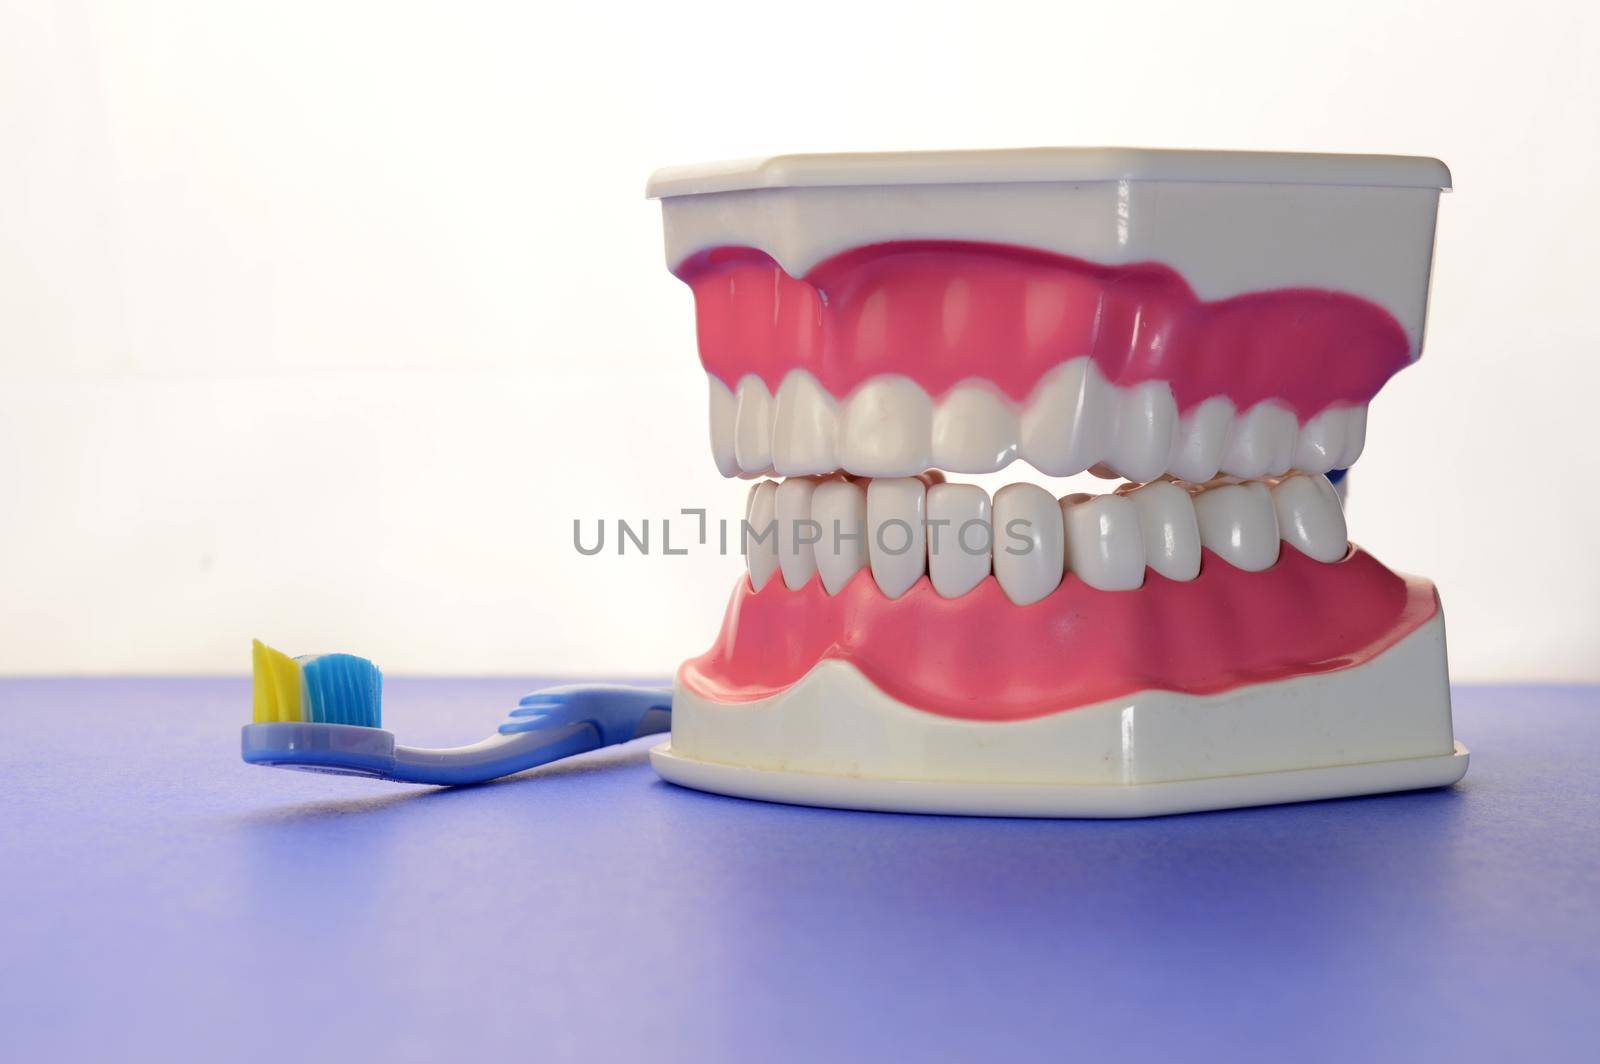 A dental tooth model and blue toothbrush remind us to brush our teeth.